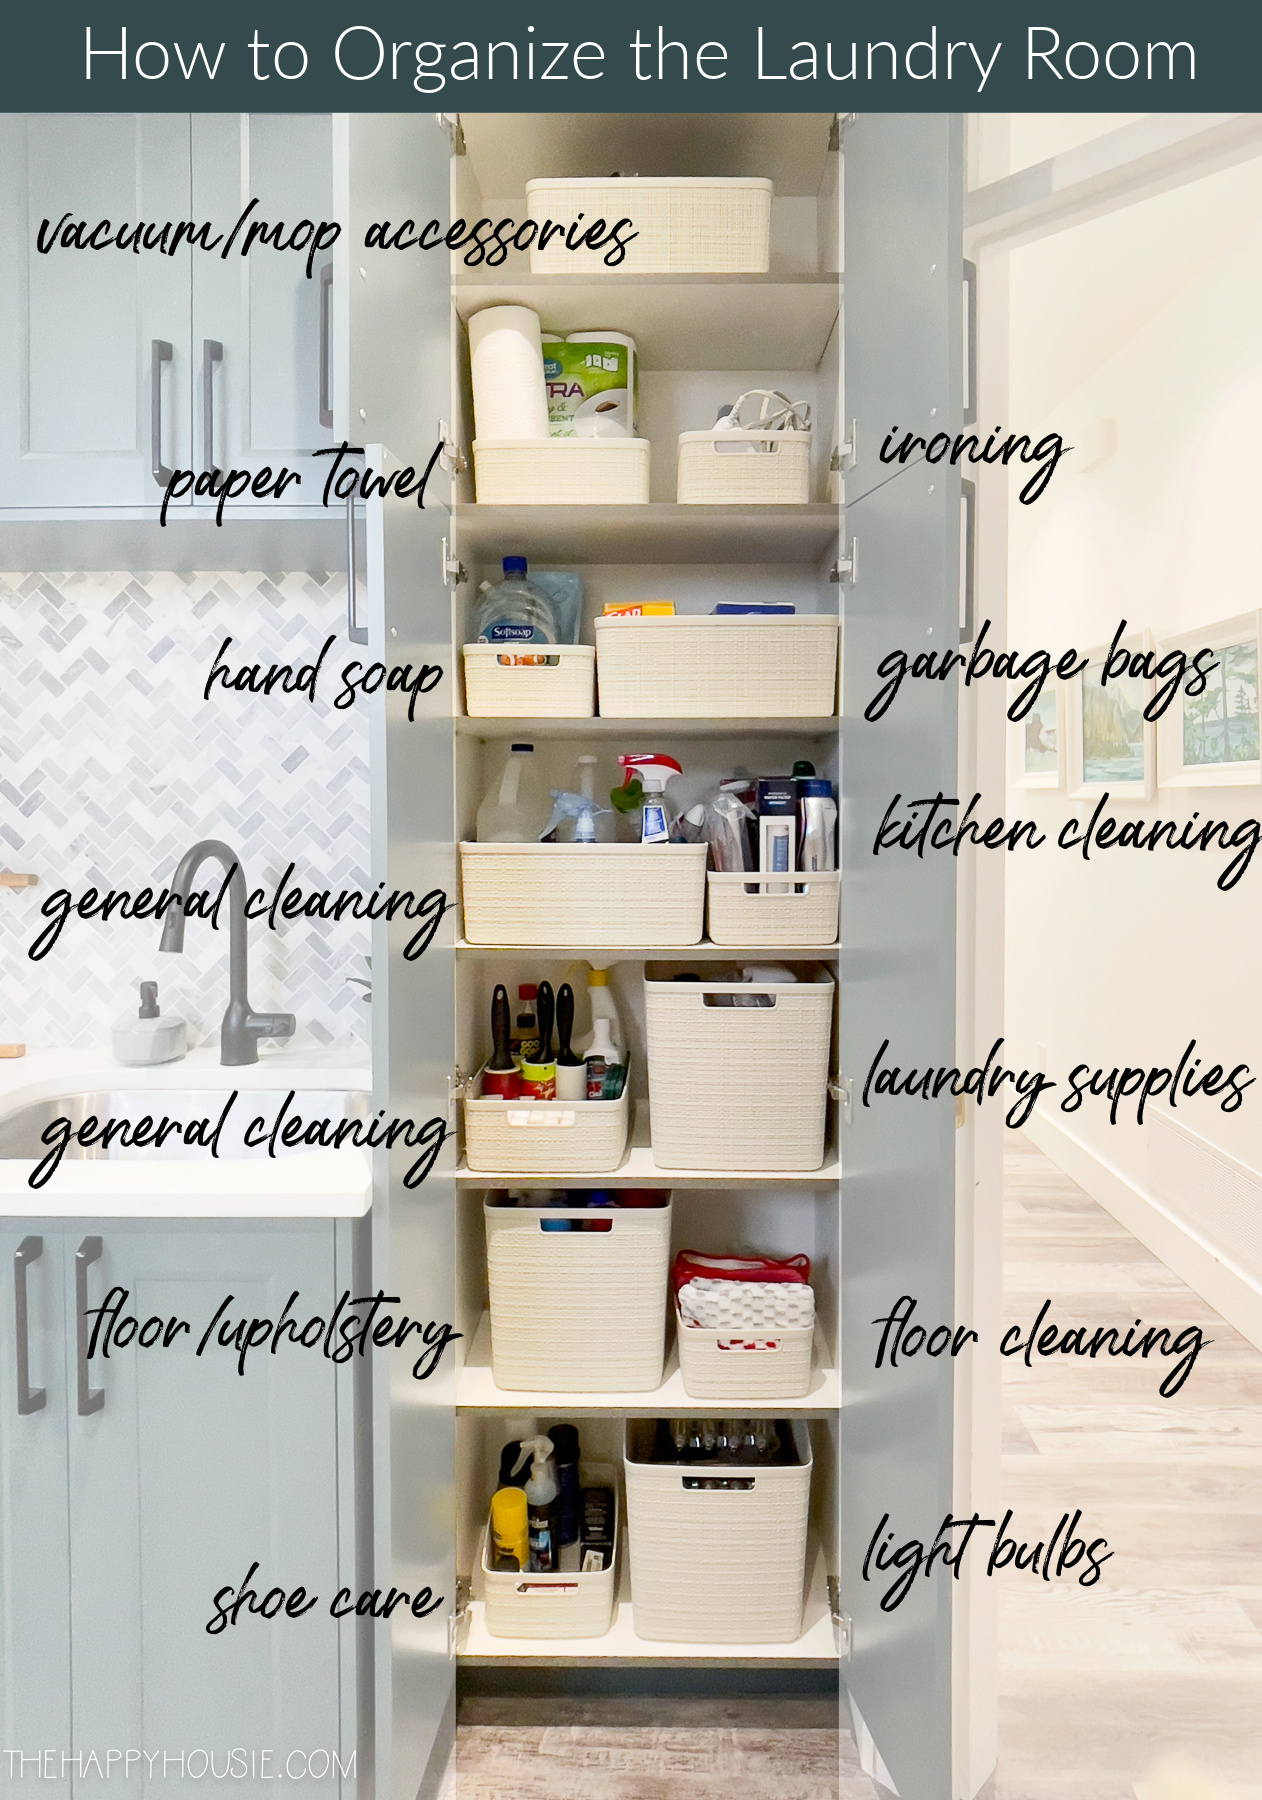 https://www.thehappyhousie.com/wp-content/uploads/2022/01/how-to-organize-your-laundry-room-2.jpg